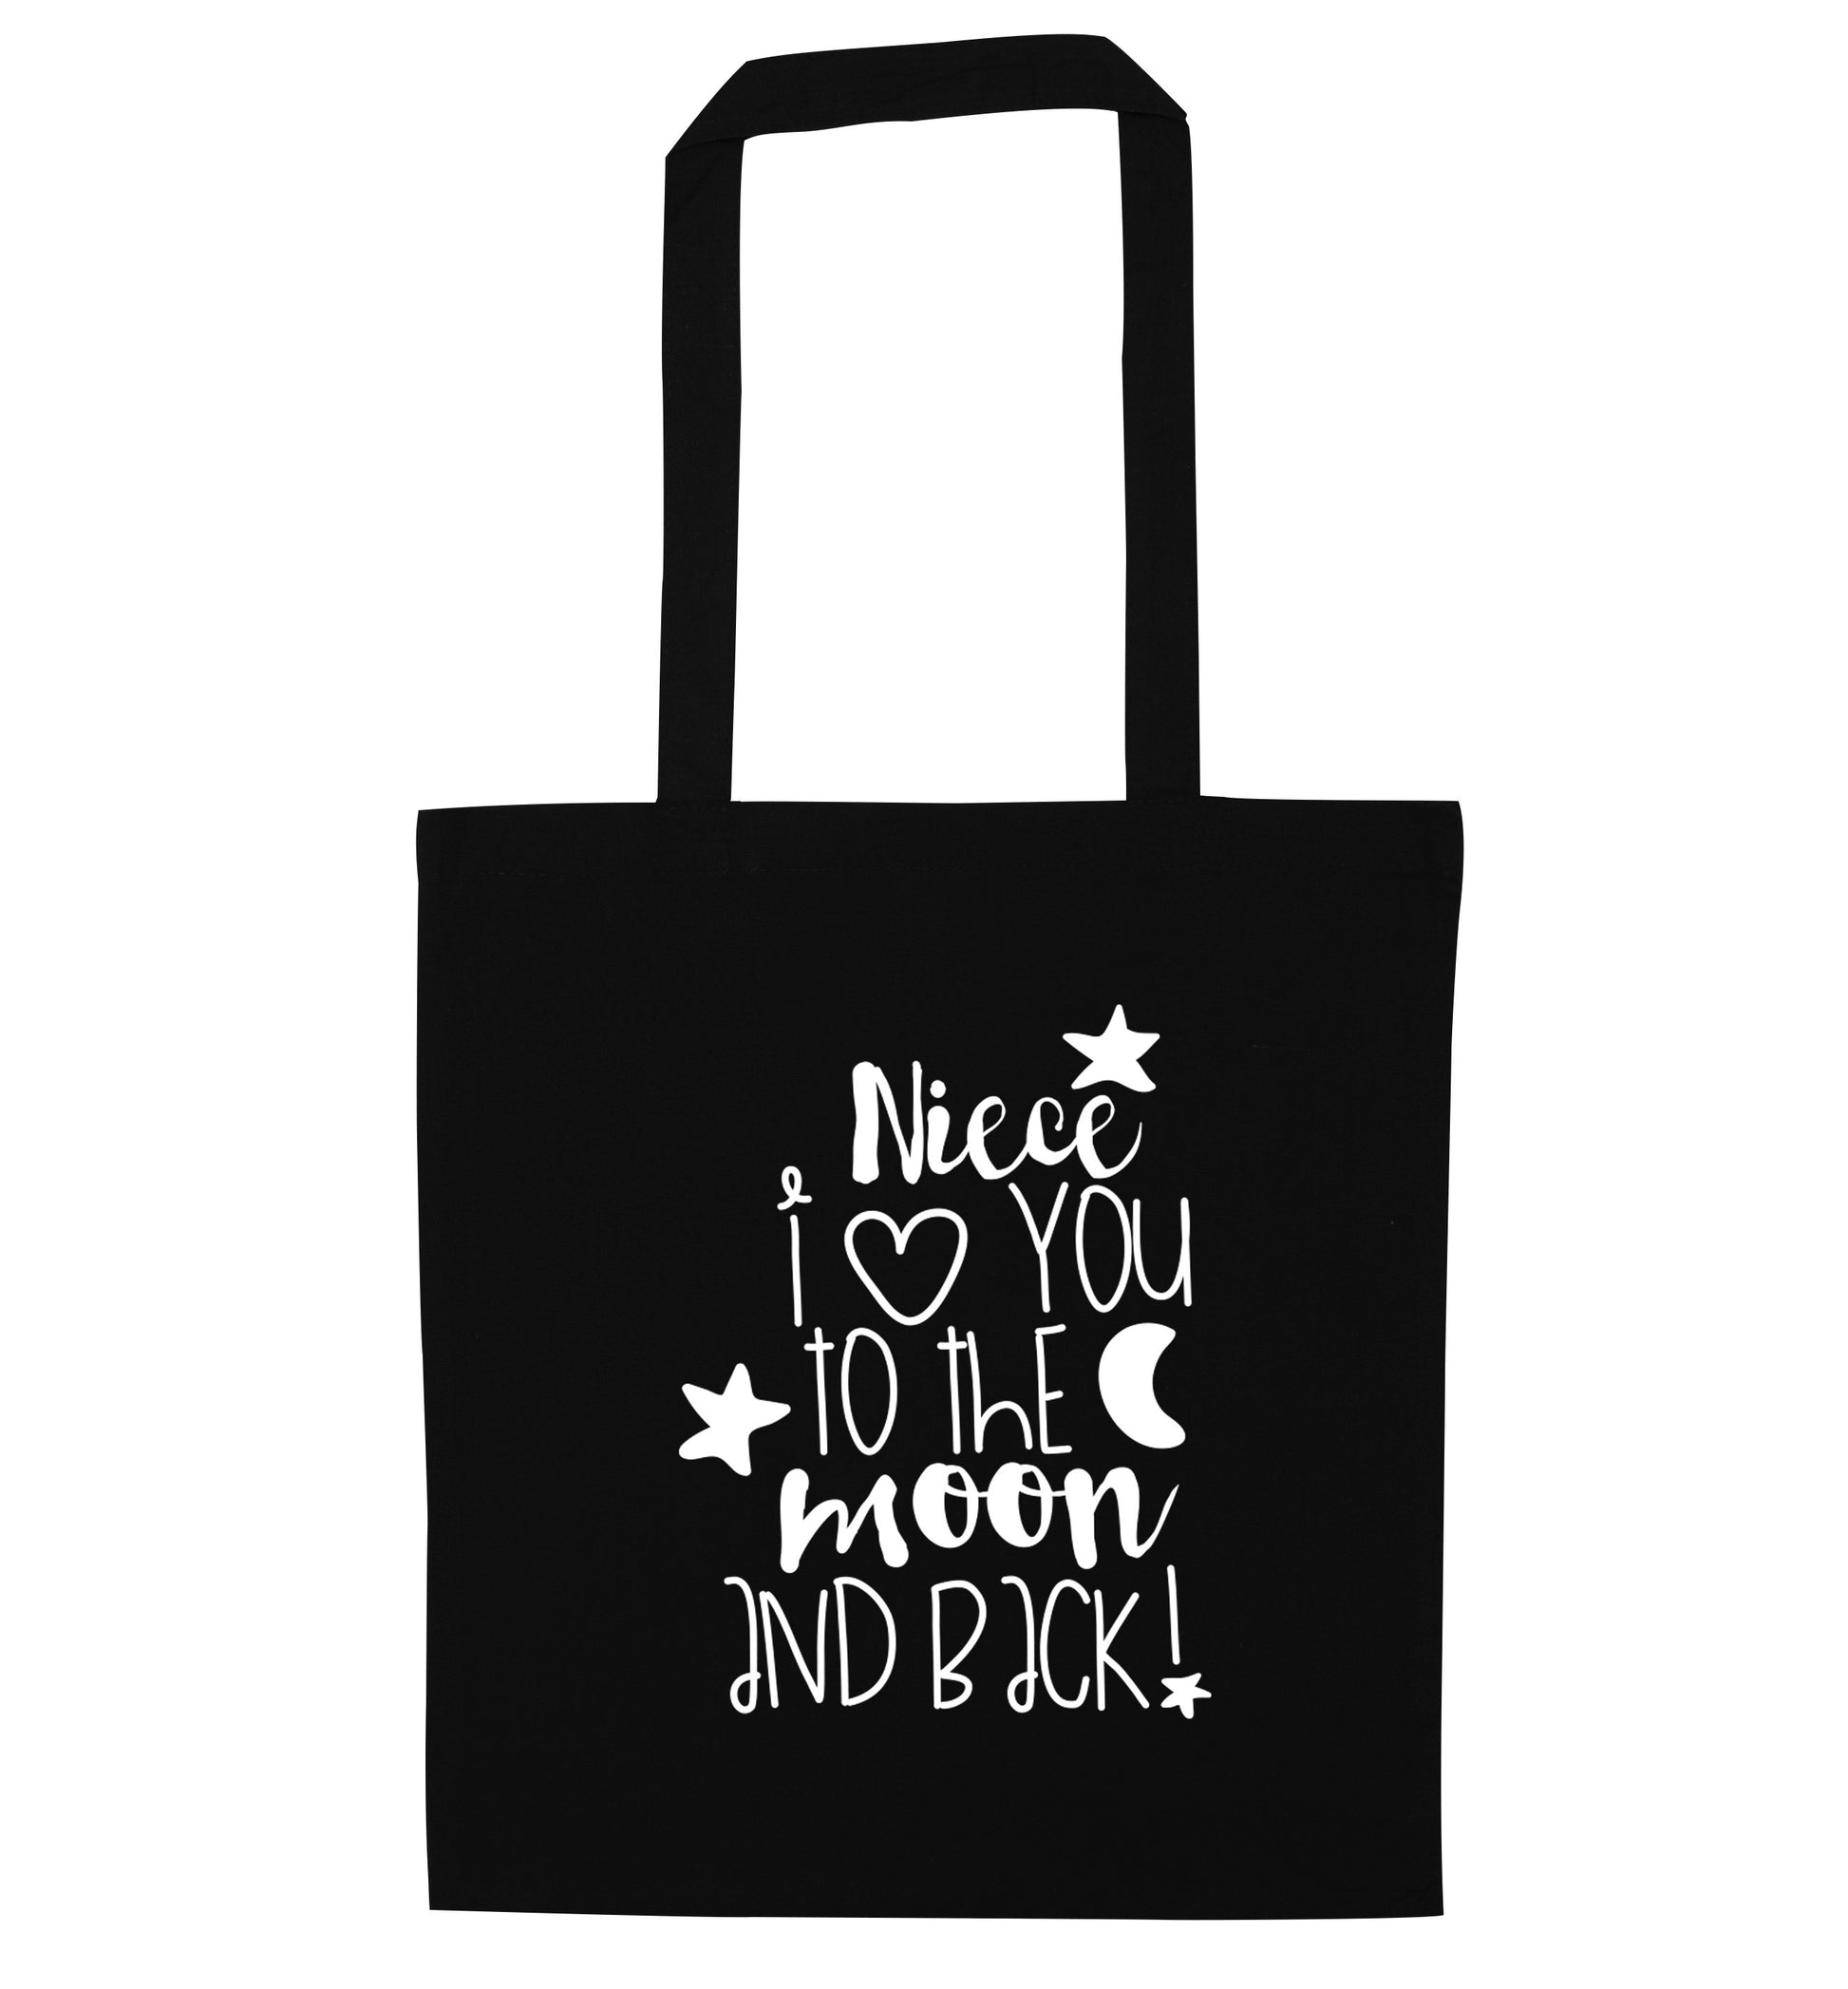 Niece I love you to the moon and back black tote bag